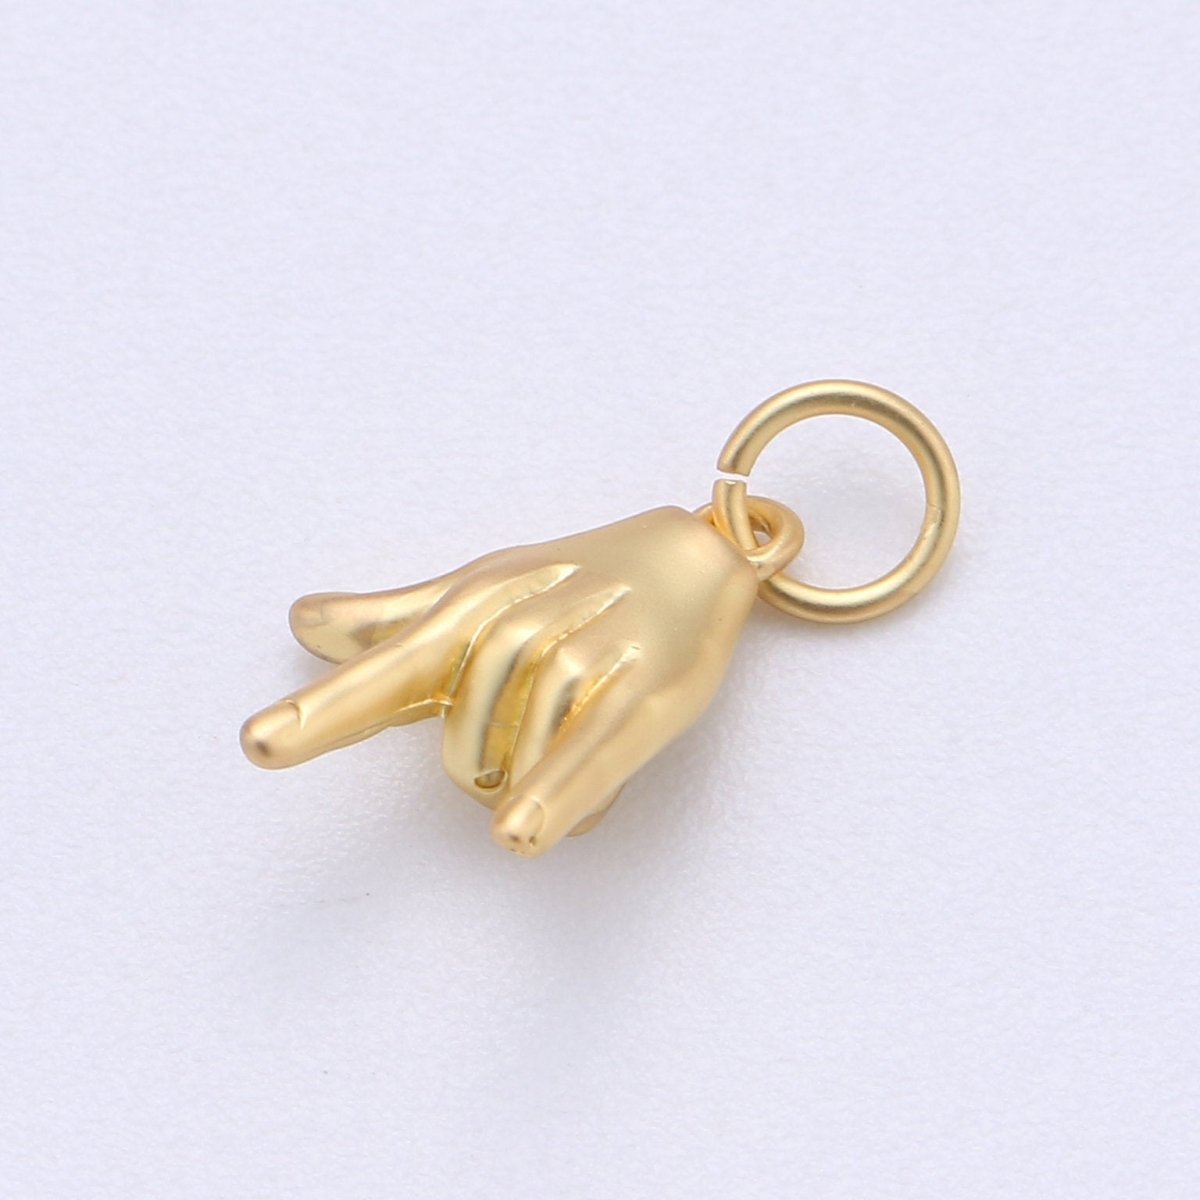 Tiny Rock On Hand Gesture Charm, Gold Fill Rock Sign For Necklace Pendant Bracelet Earring Charm Jewelry Making Gift Rocker Metal Musician E-226-E-228 - DLUXCA